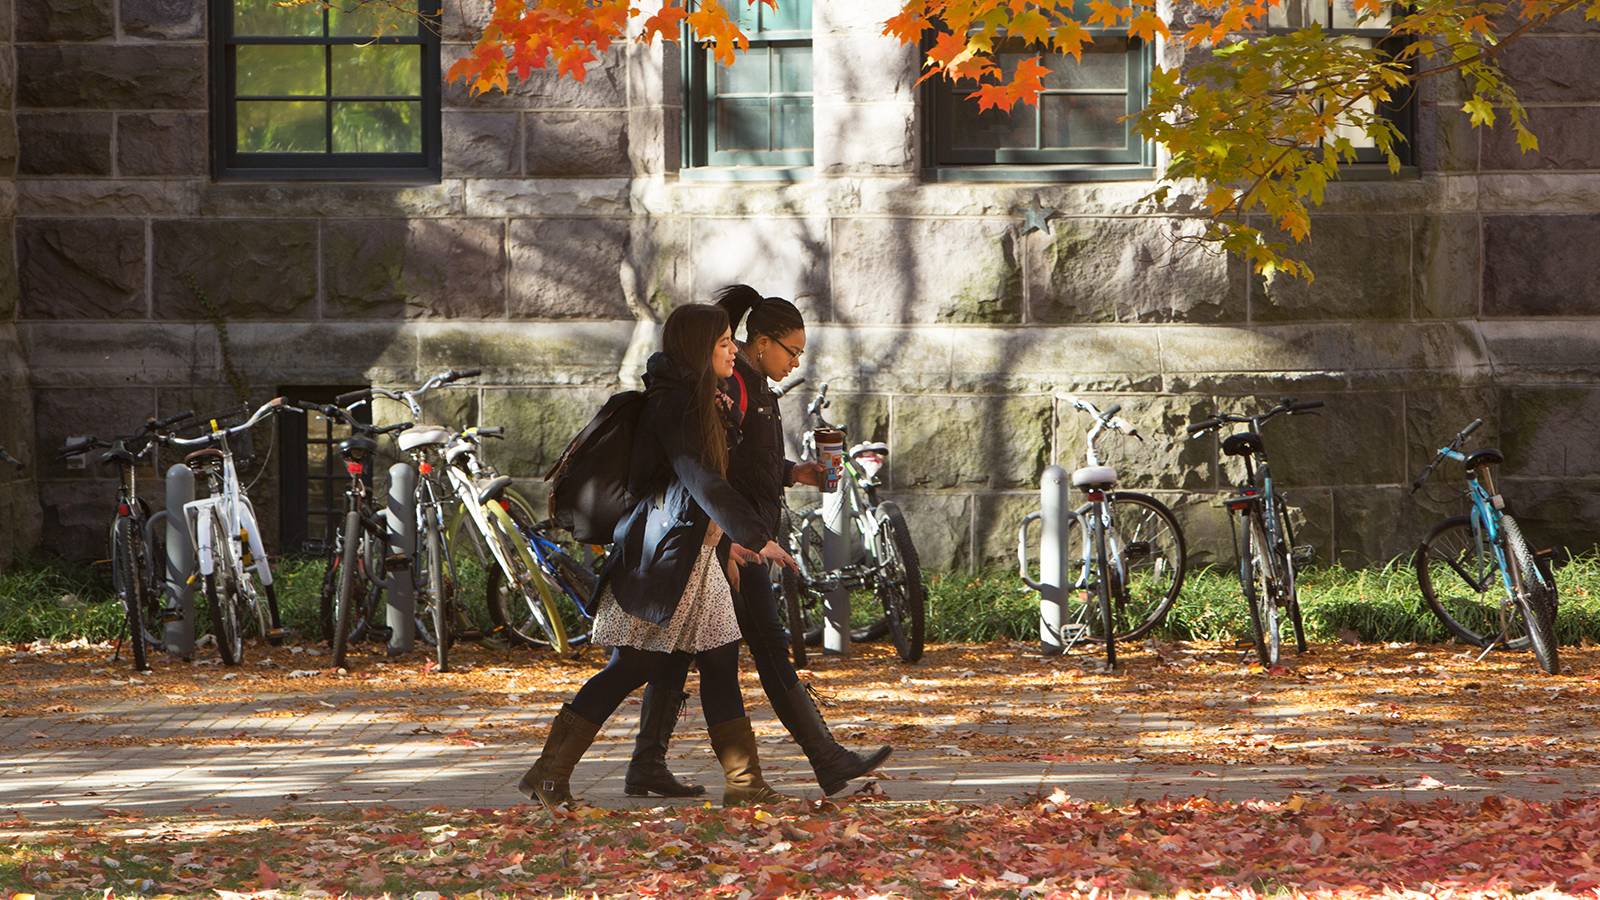 Students walking on campus during fall